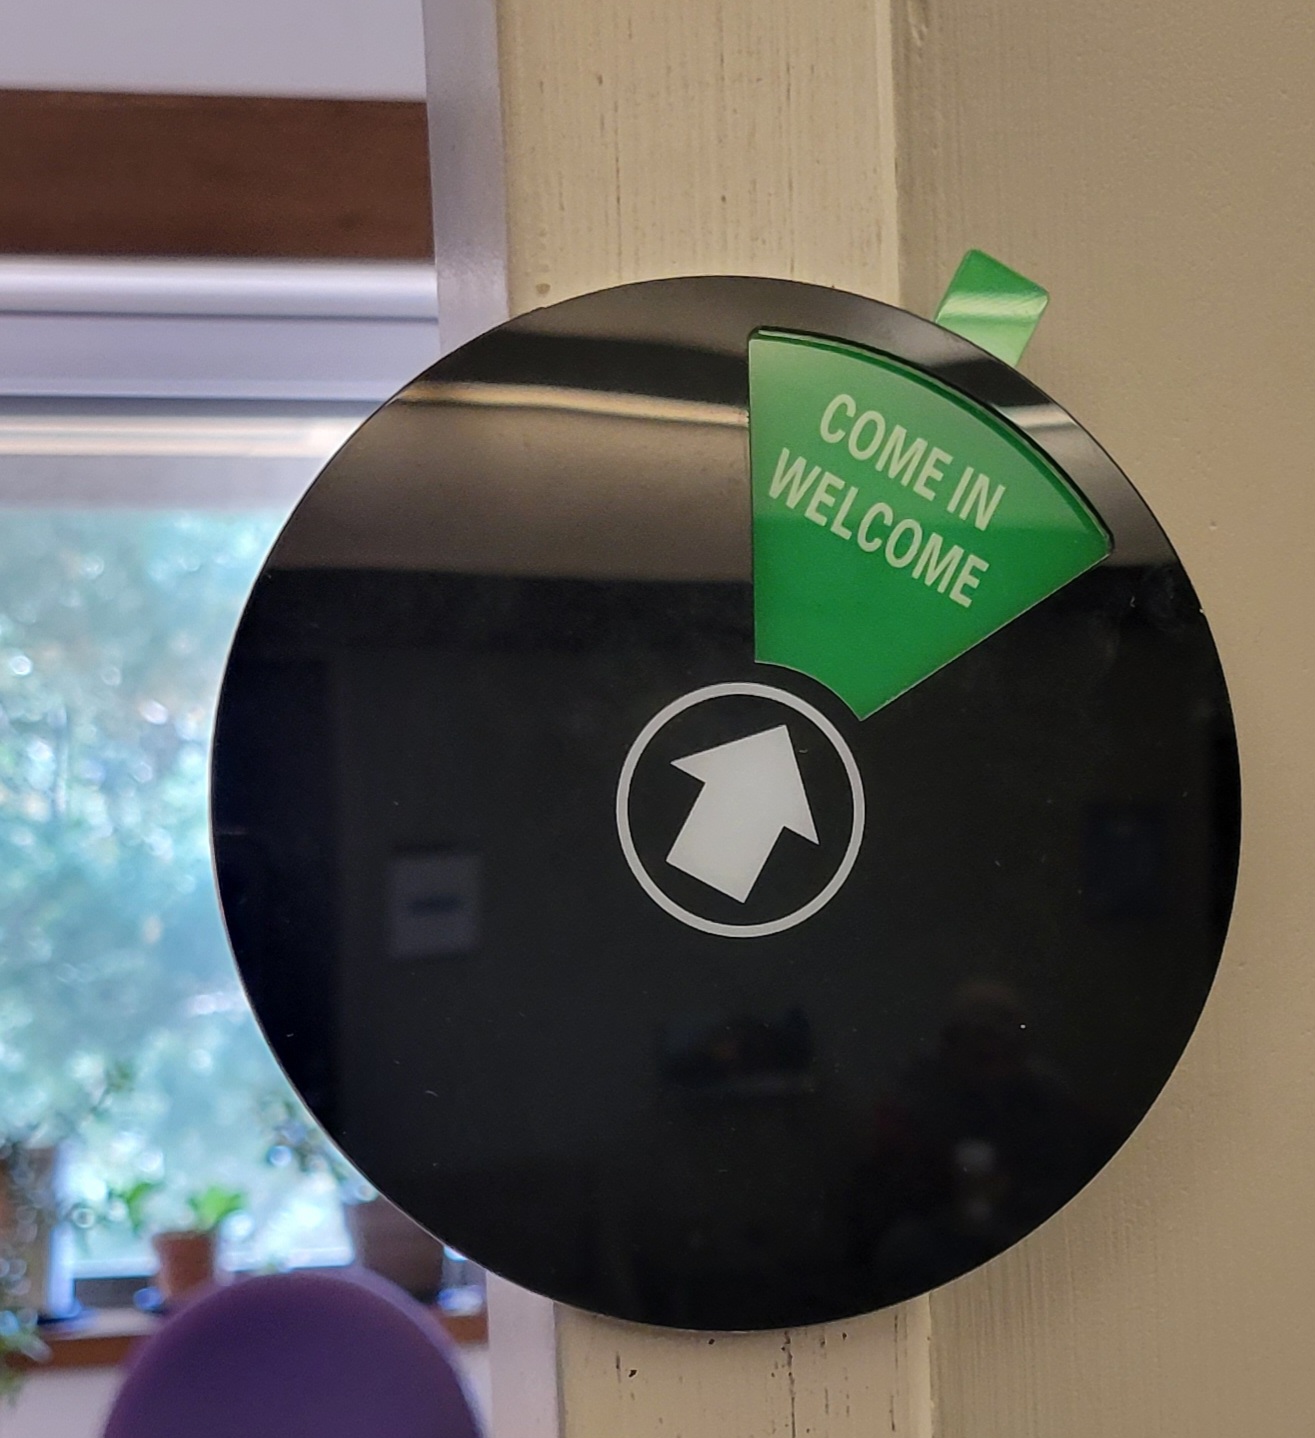 Black circle with a green triangle at its top that says "come in welcome"